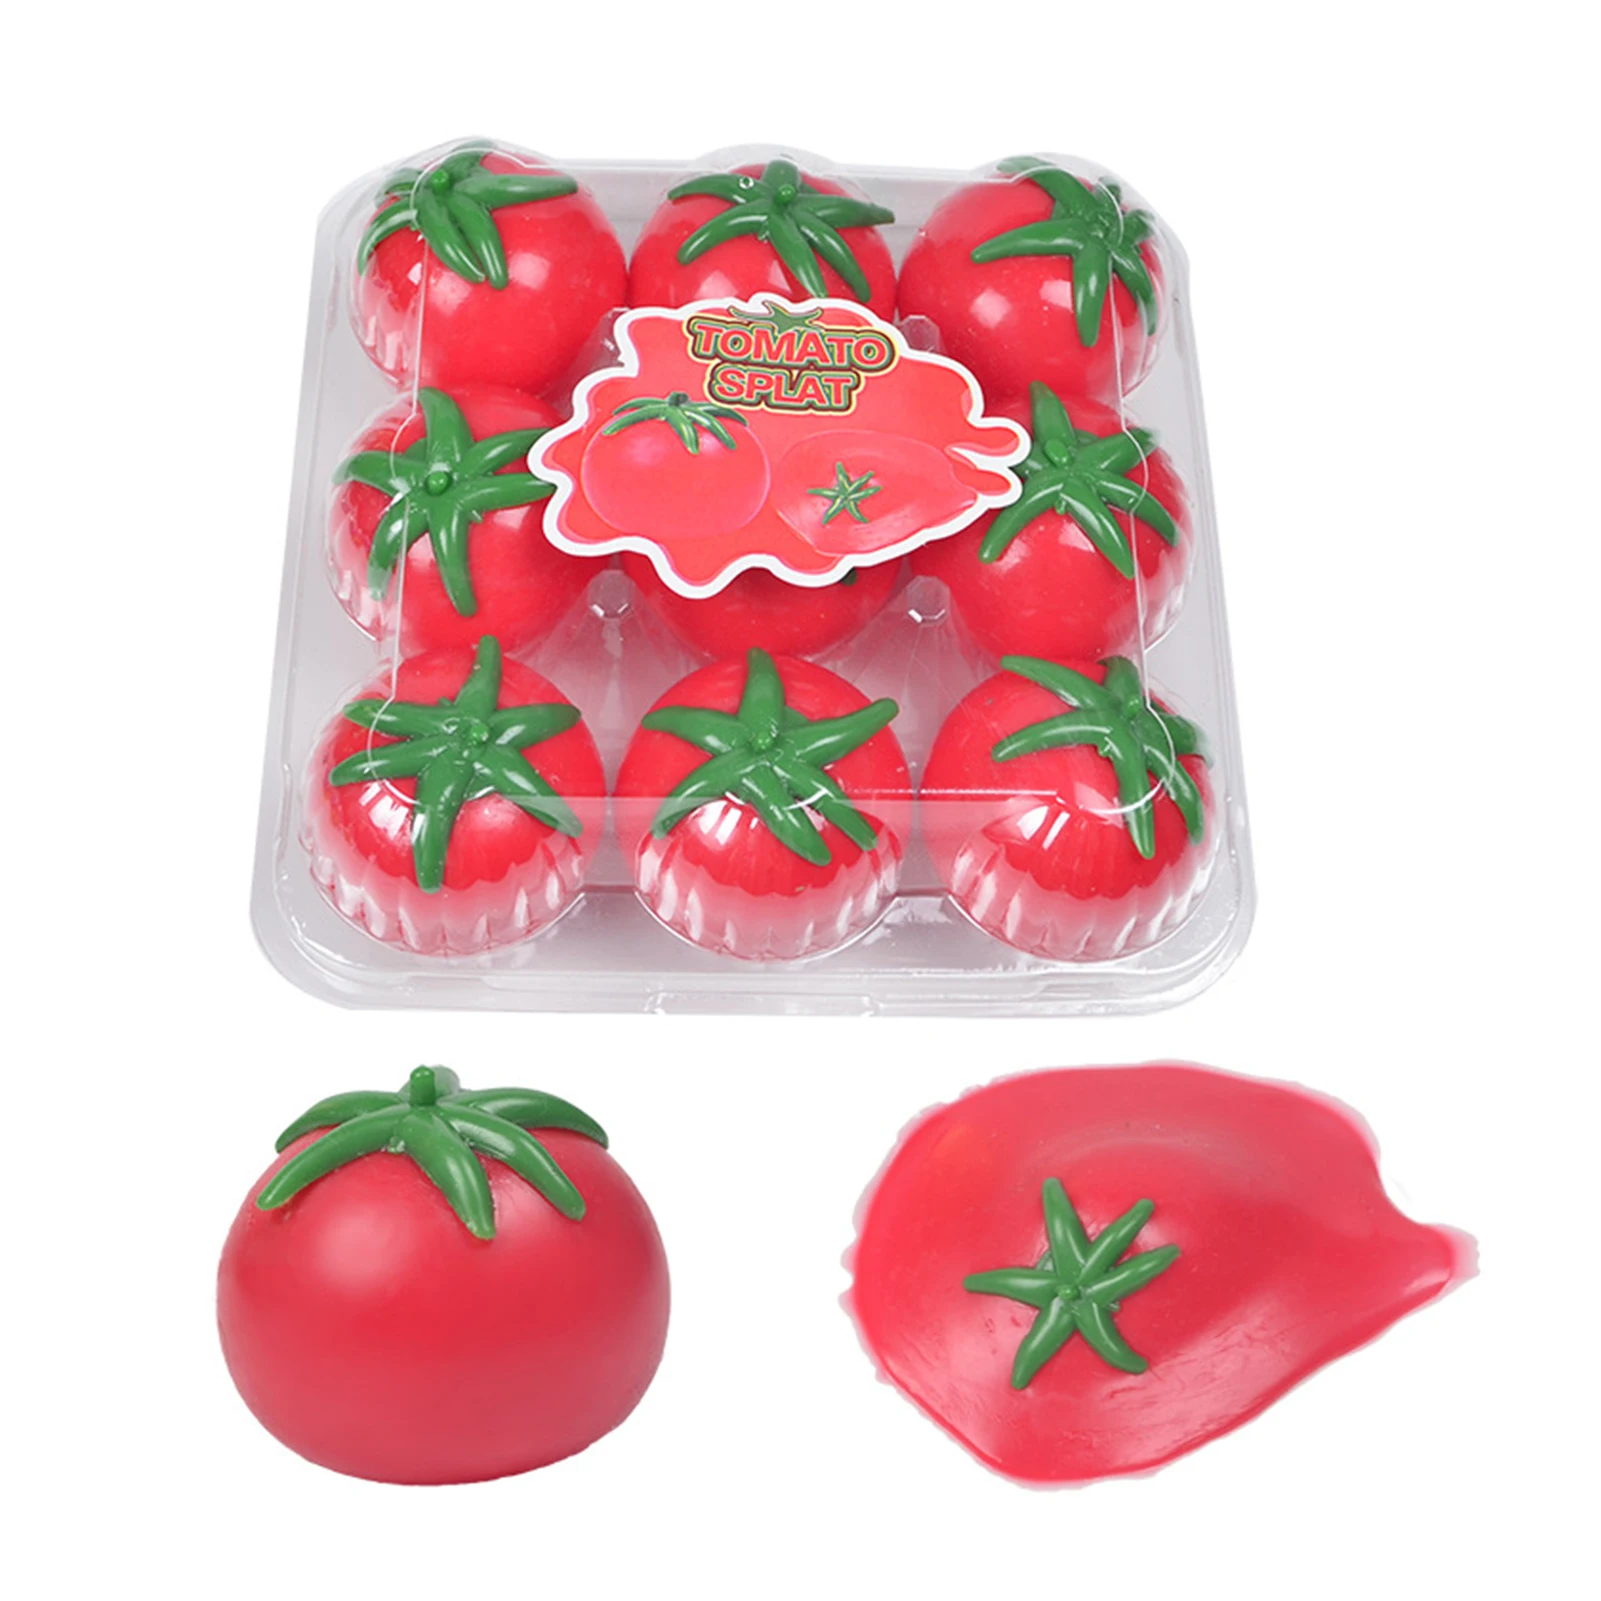 Sticky Splat Tomato Balls Simulation Fruit Food Tomato Shaped Water Squeez Ball Vent Tomato Toys Stress Reliever Sensory Toy enlarge